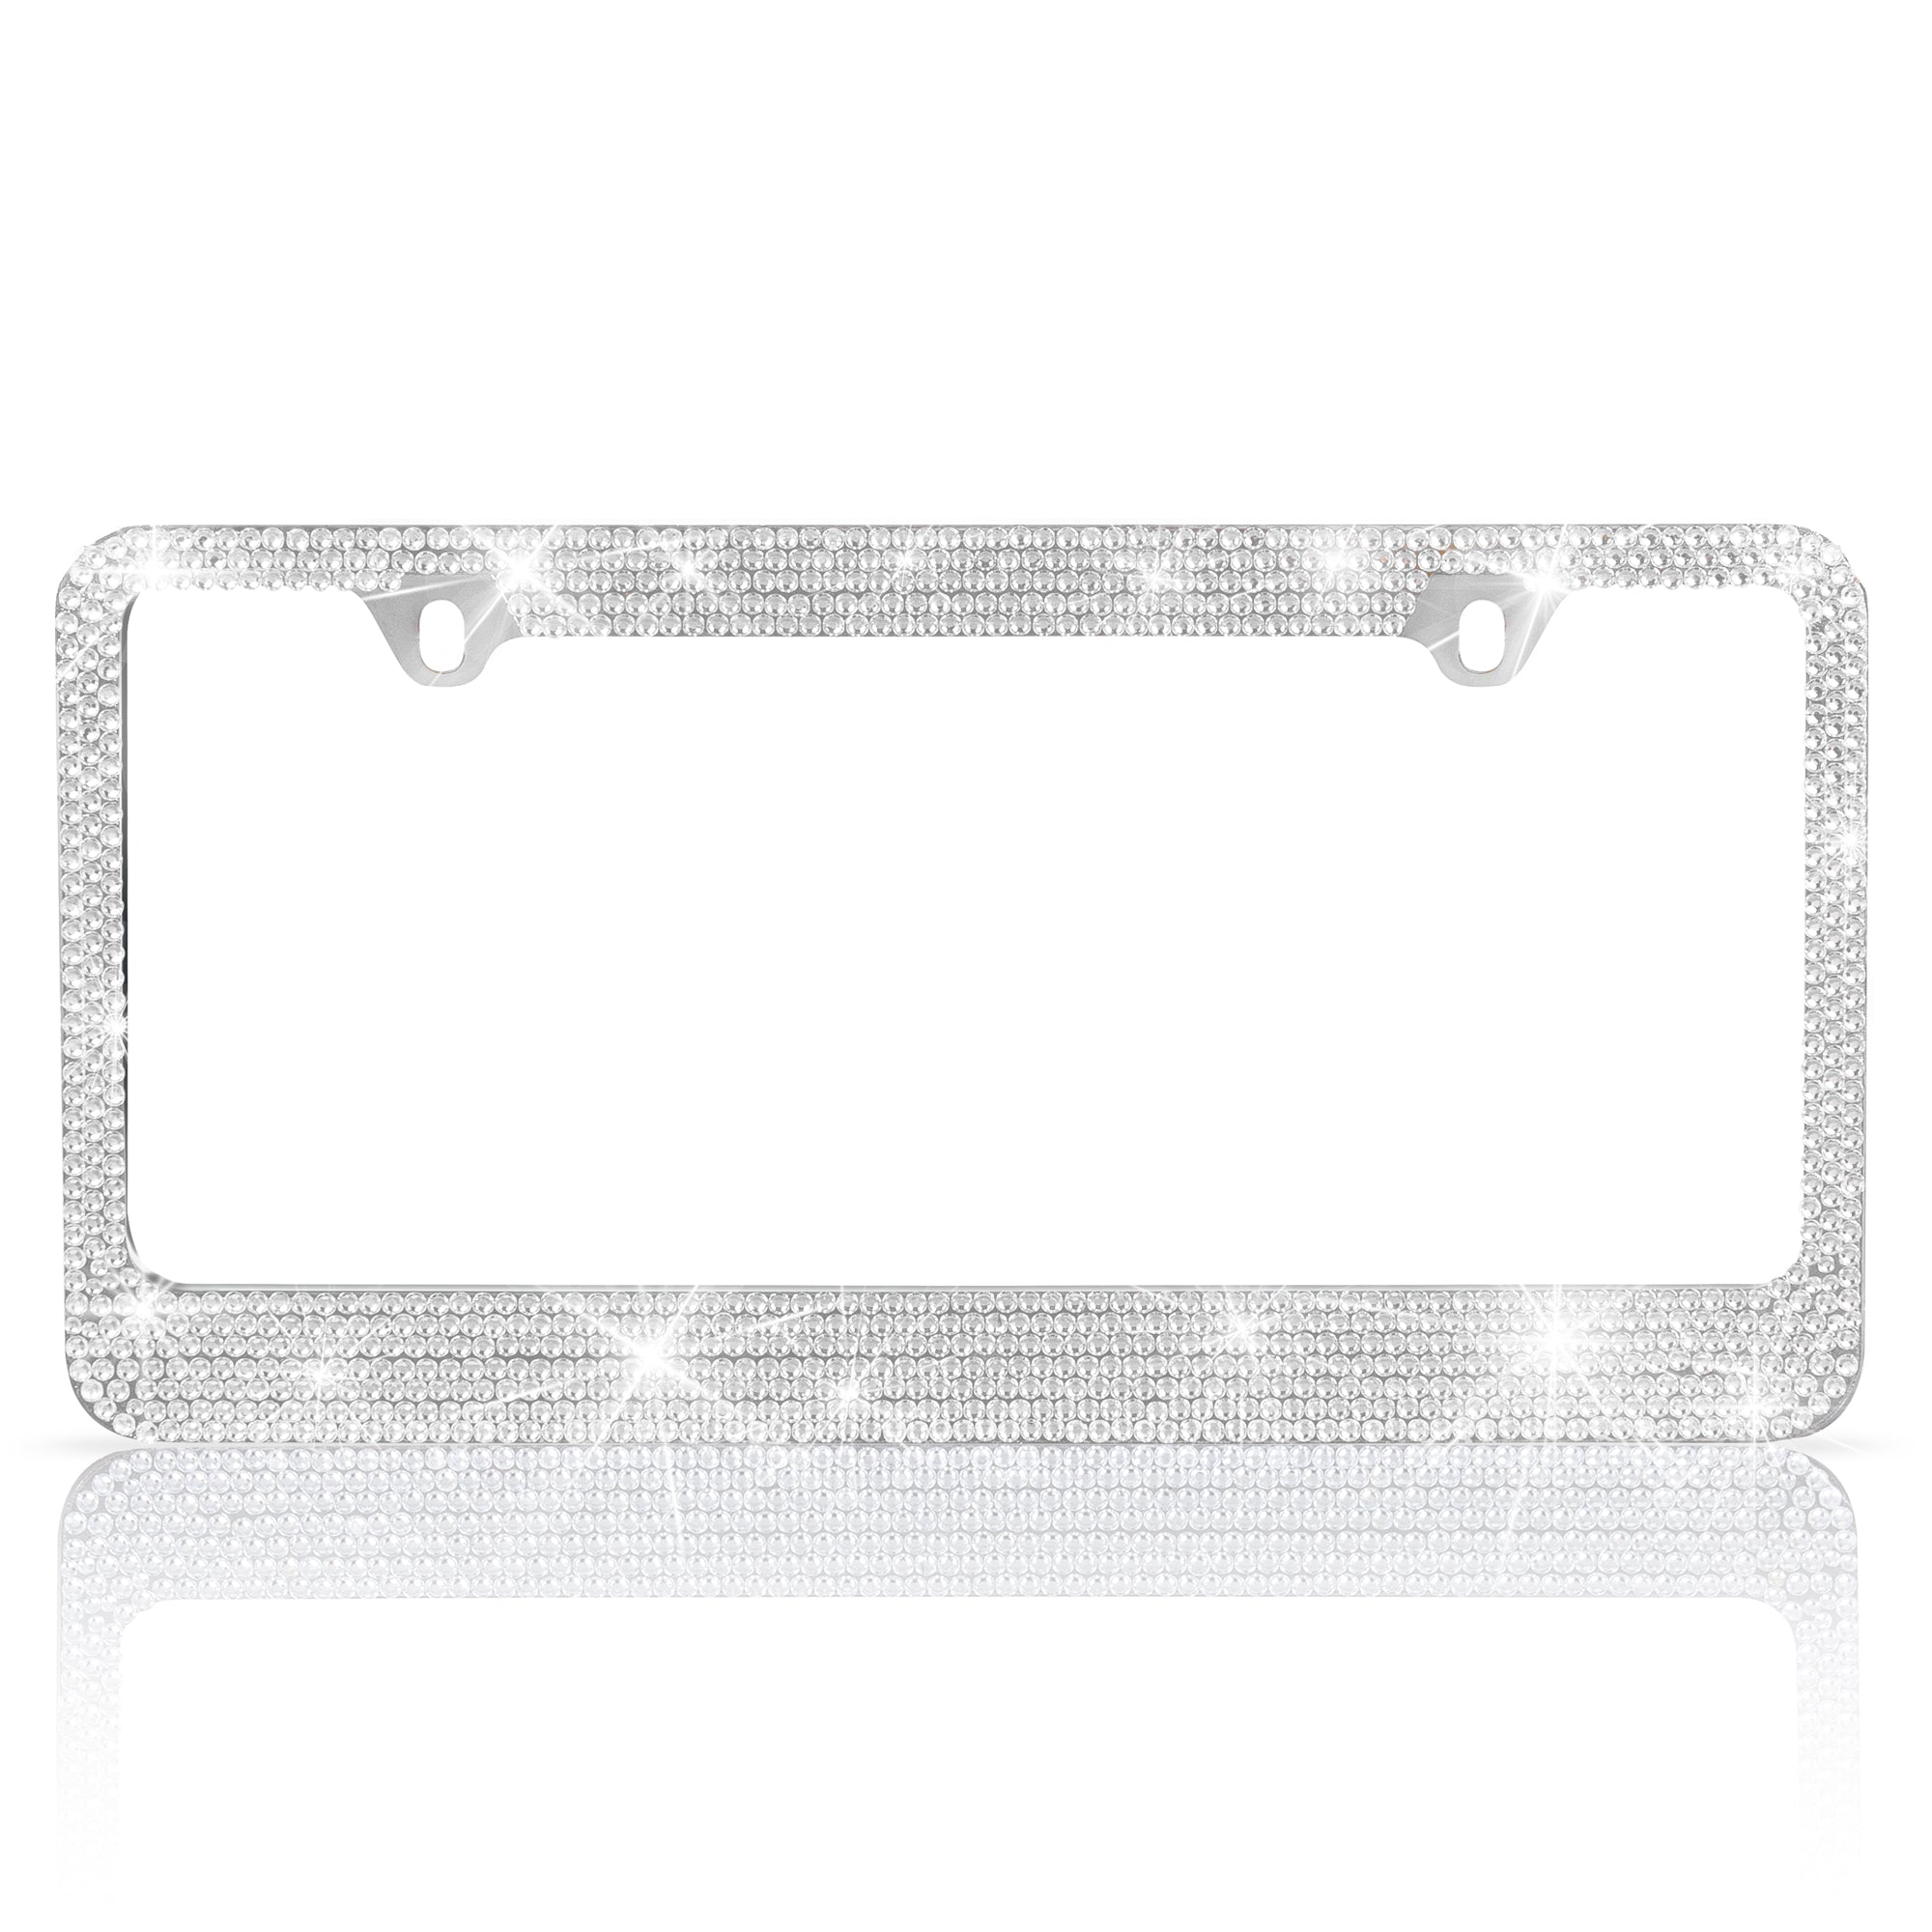 Stainless Steel Silver Sparkly Sparkling Diamond Crystal Bling Premium License Plate Frame Stainless Steel Metal Silver Rhinestone for Women Universal Size for Car Truck SUV (Pack of 2) - 2-Pack